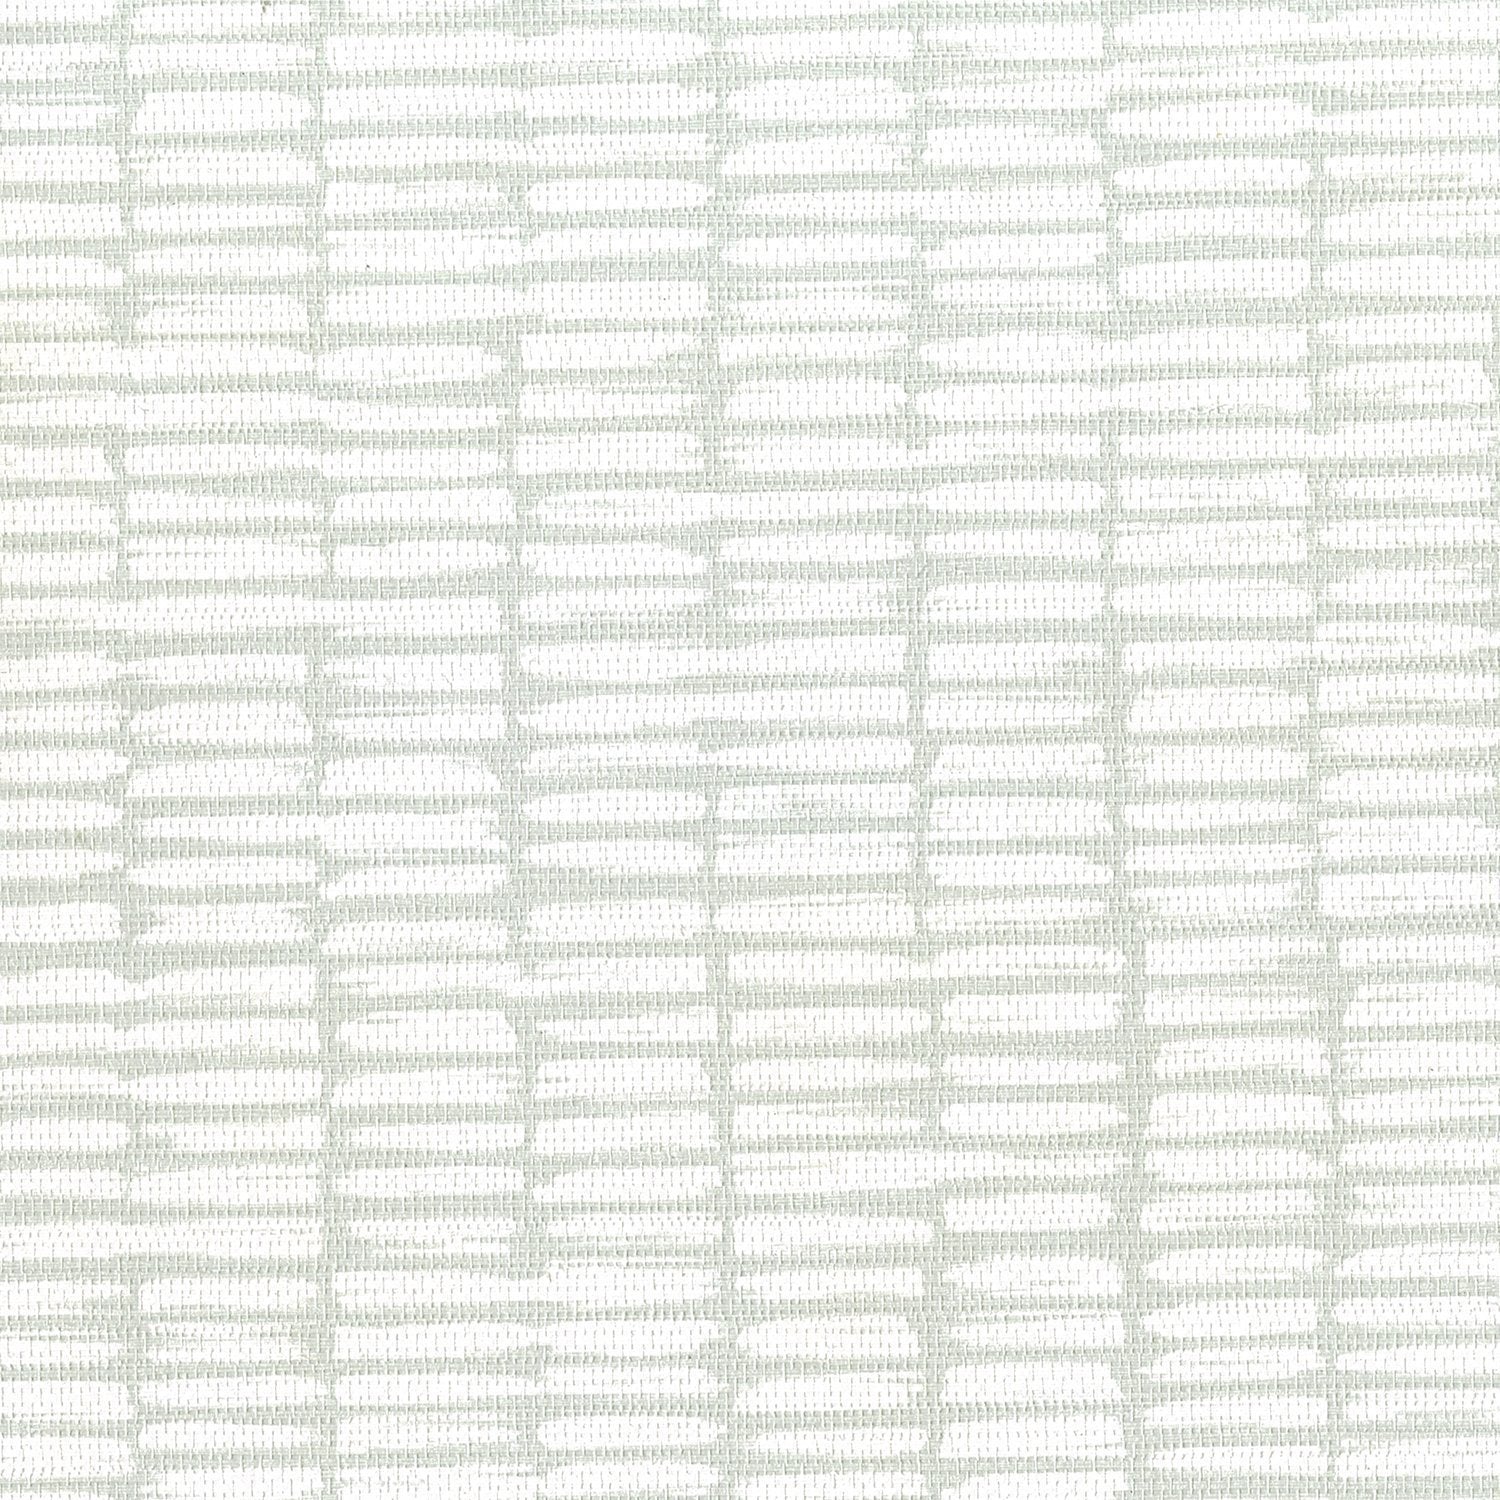 Dash-ing - Y48017 - Wallcovering - Vycon - Kube Contract